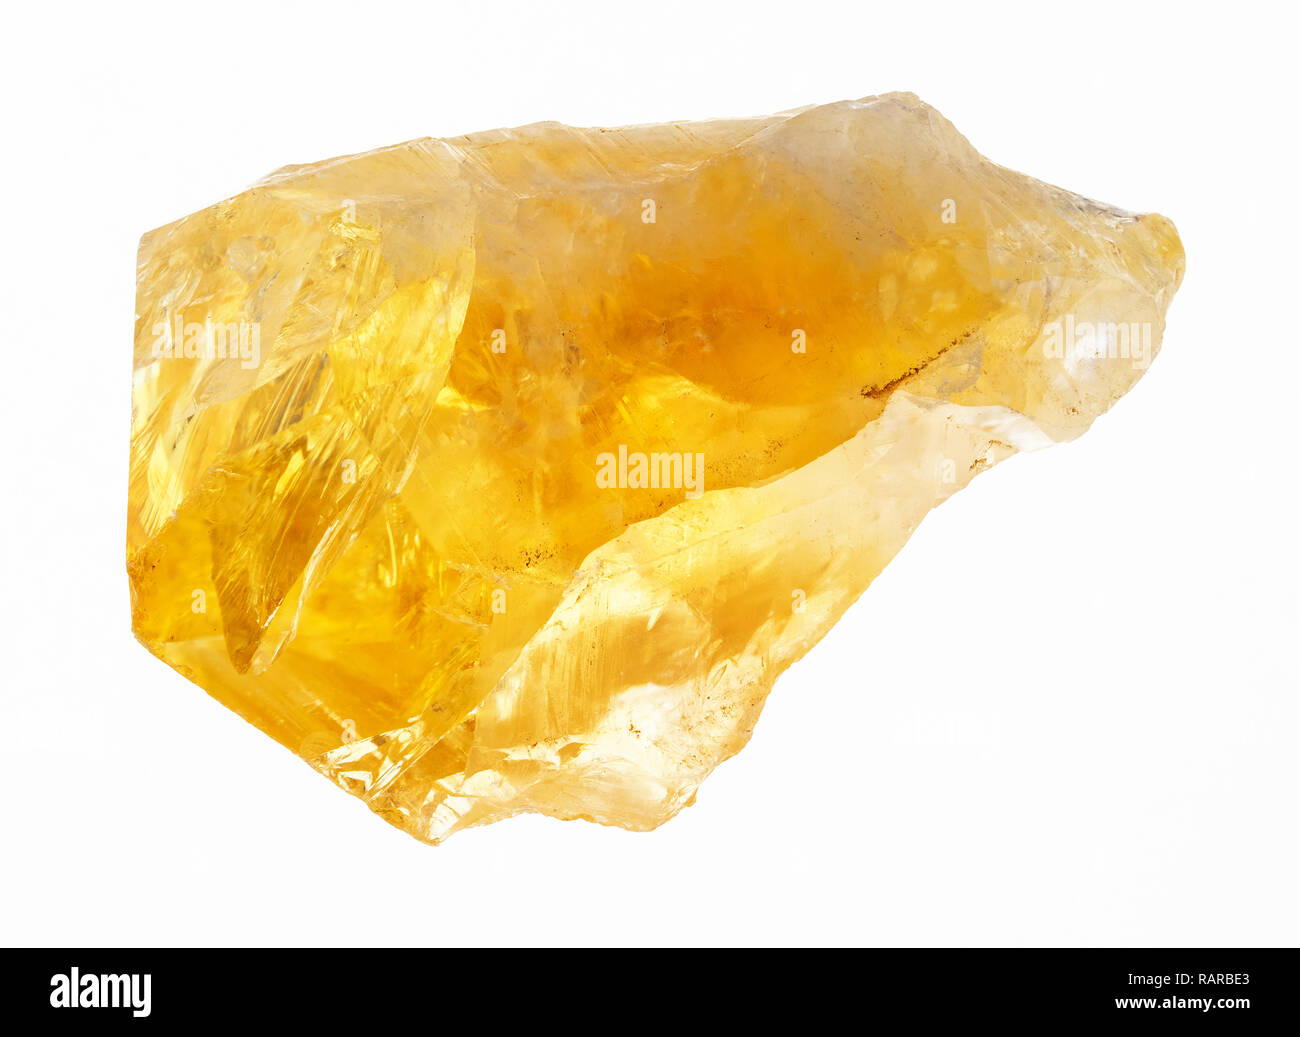 Macro Photography Of Natural Mineral From Geological Collection Rough Crystal Of Citrine Yellow Quartz On White Background Stock Photo Alamy